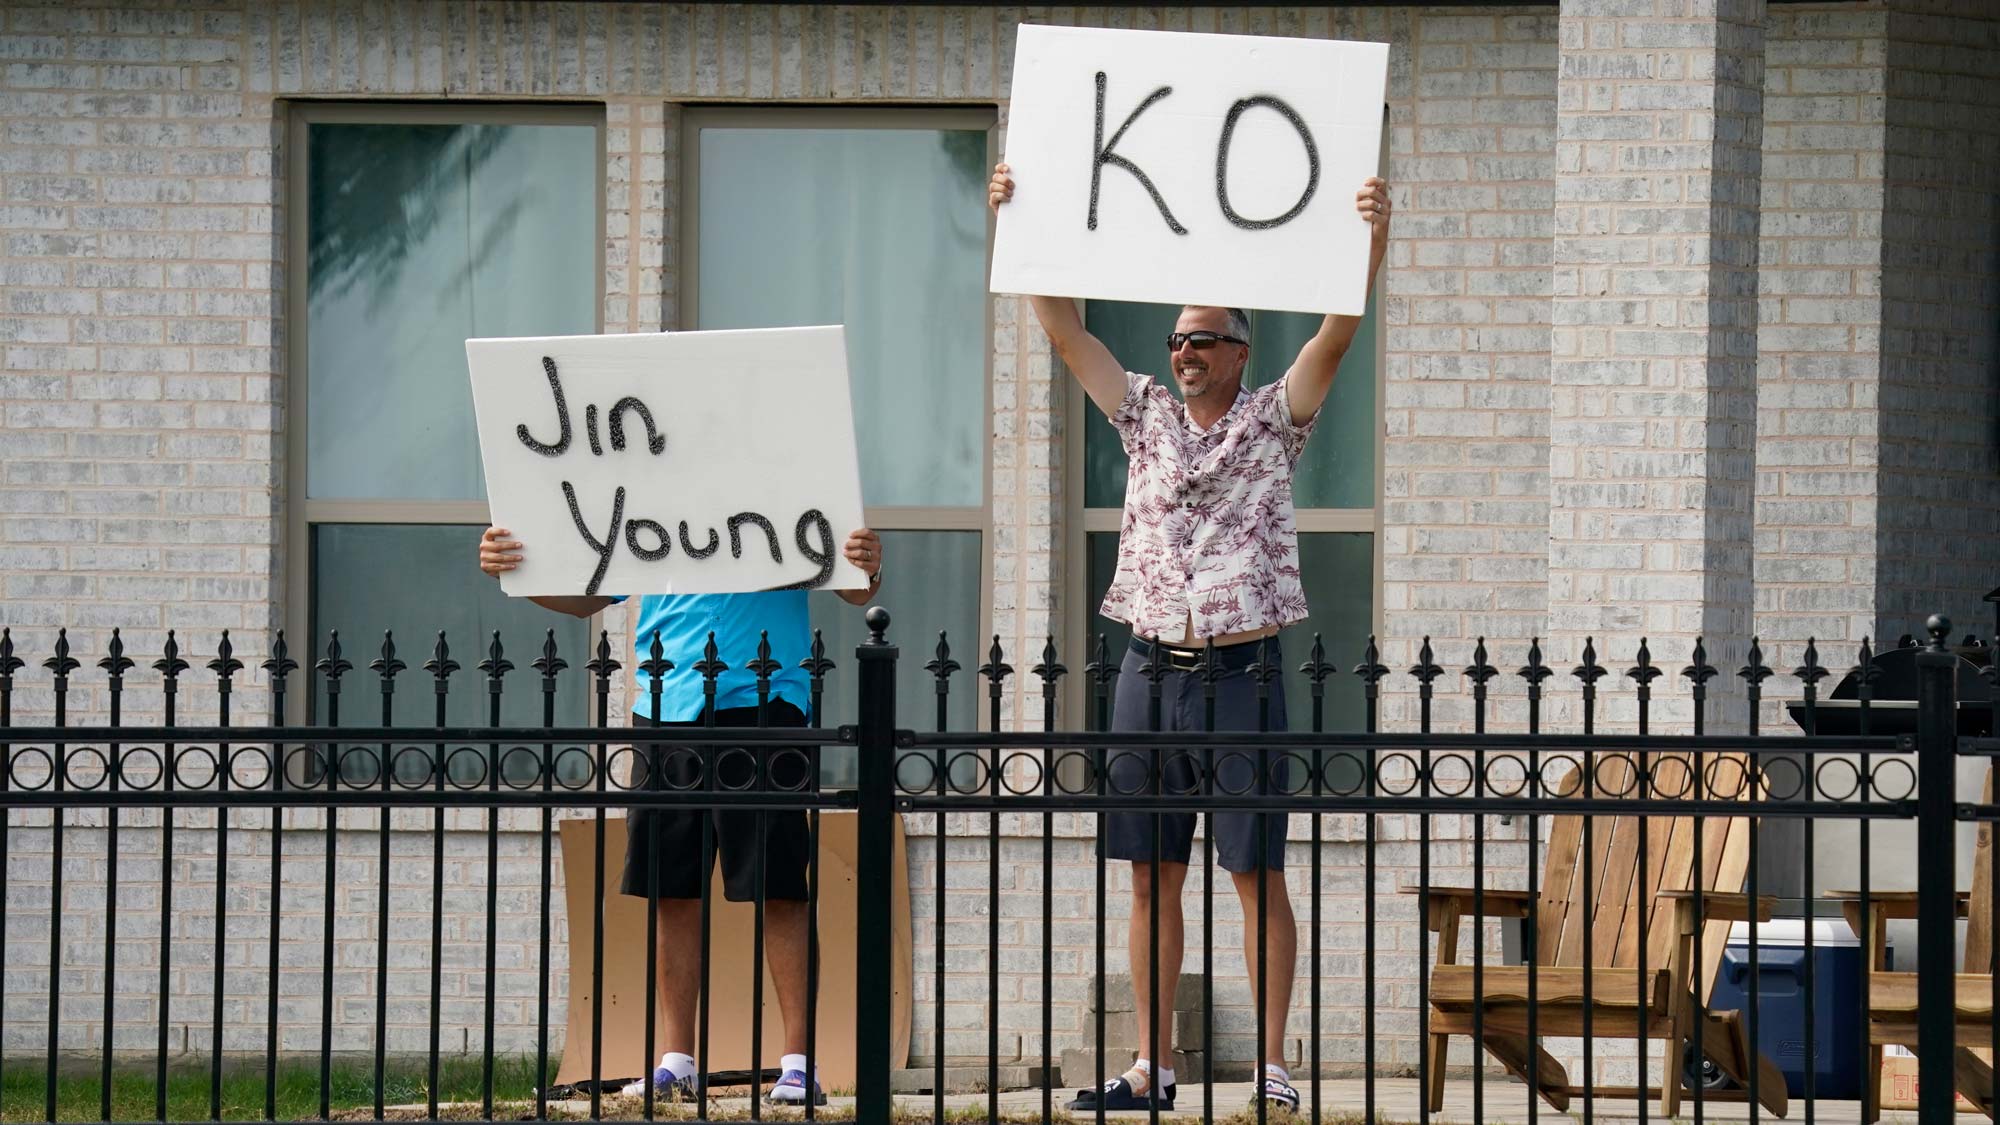 Fans at a home near the second green show their support for Jin Young Ko during the third round of the Volunteers of America Classic 